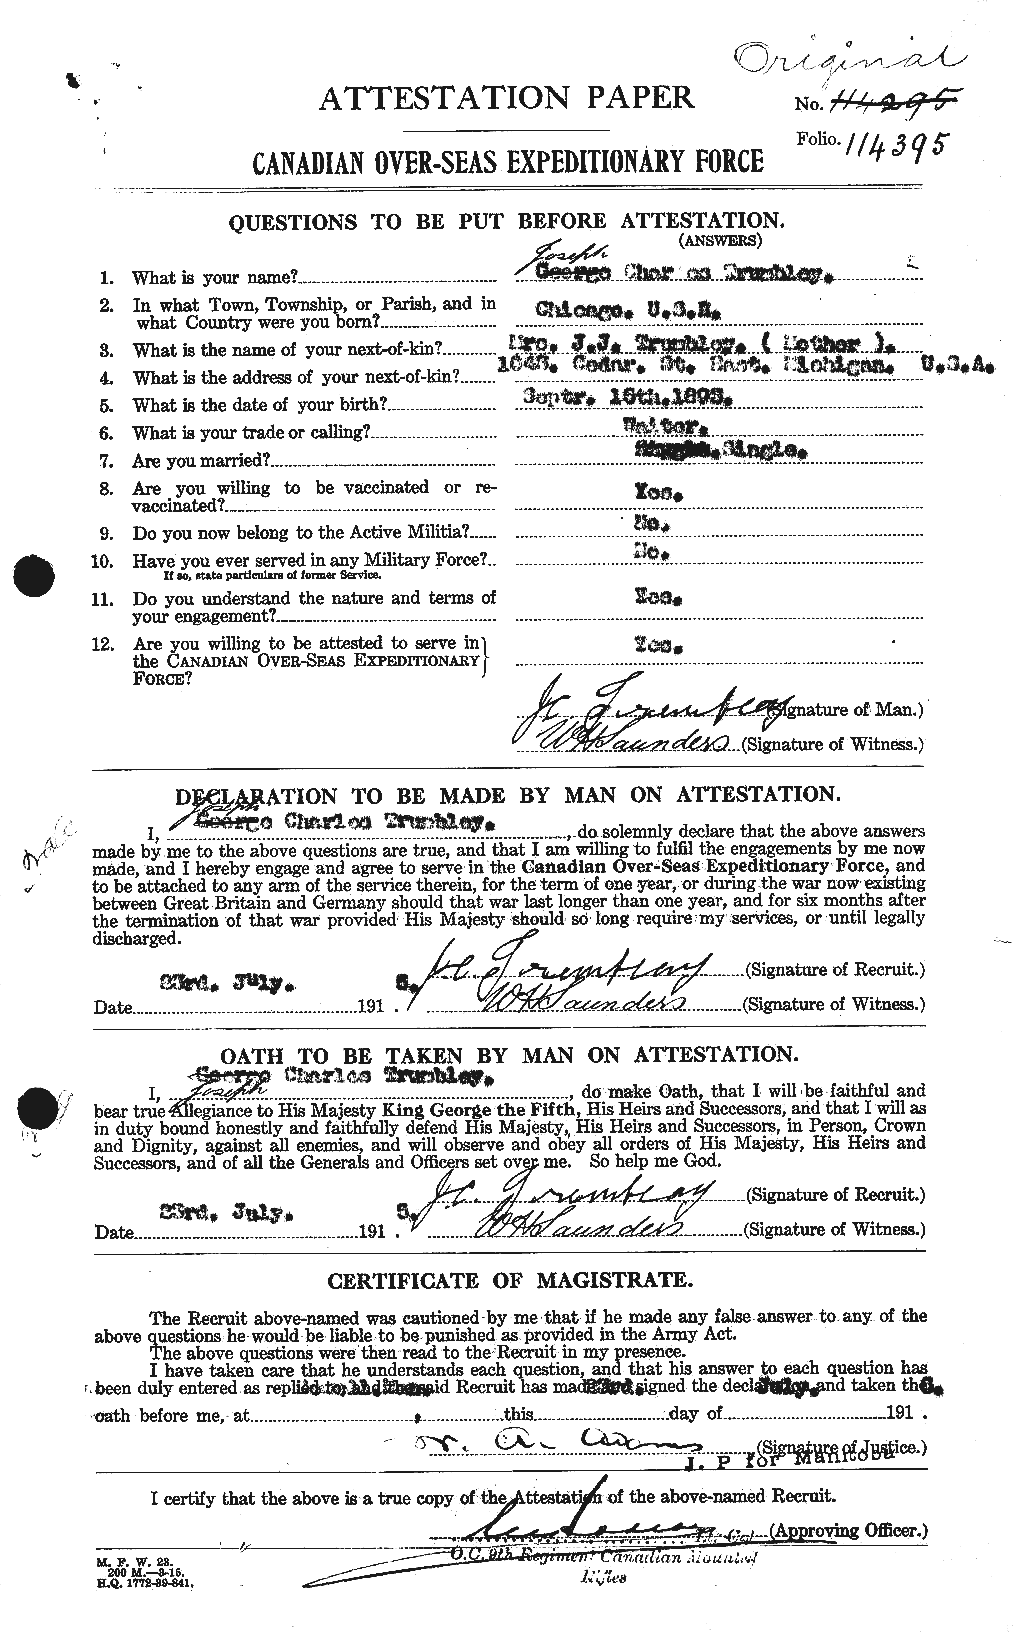 Personnel Records of the First World War - CEF 639145a